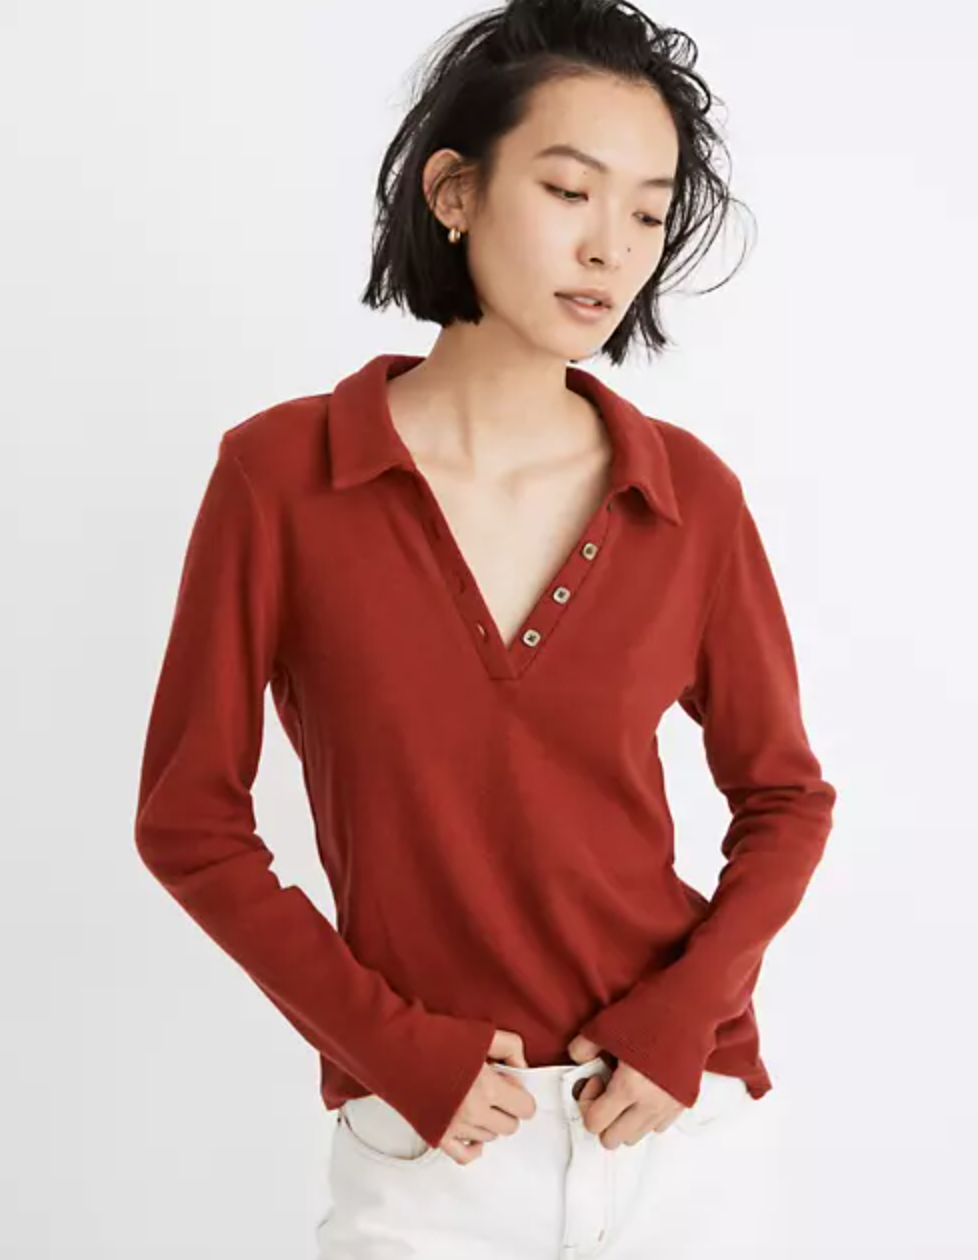 Get Up To 50% Off The Most Stylish Finds From Madewell’s Black Friday Sale